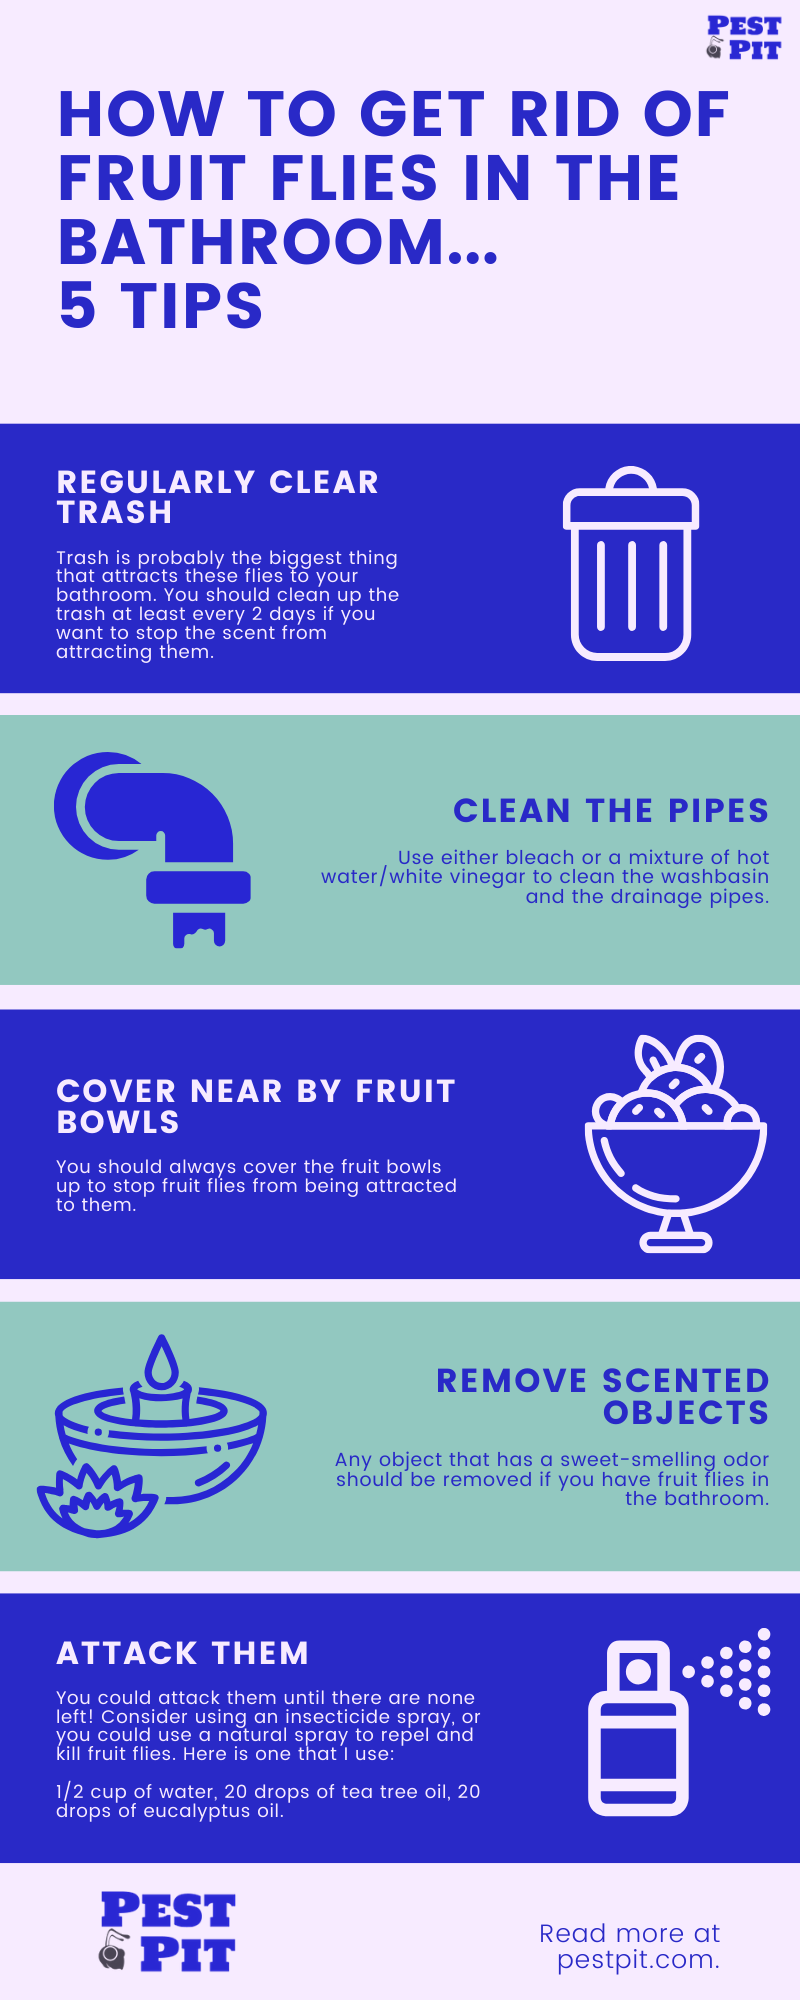 How To Get Rid Of Fruit Flies In The Bathroom Infographic